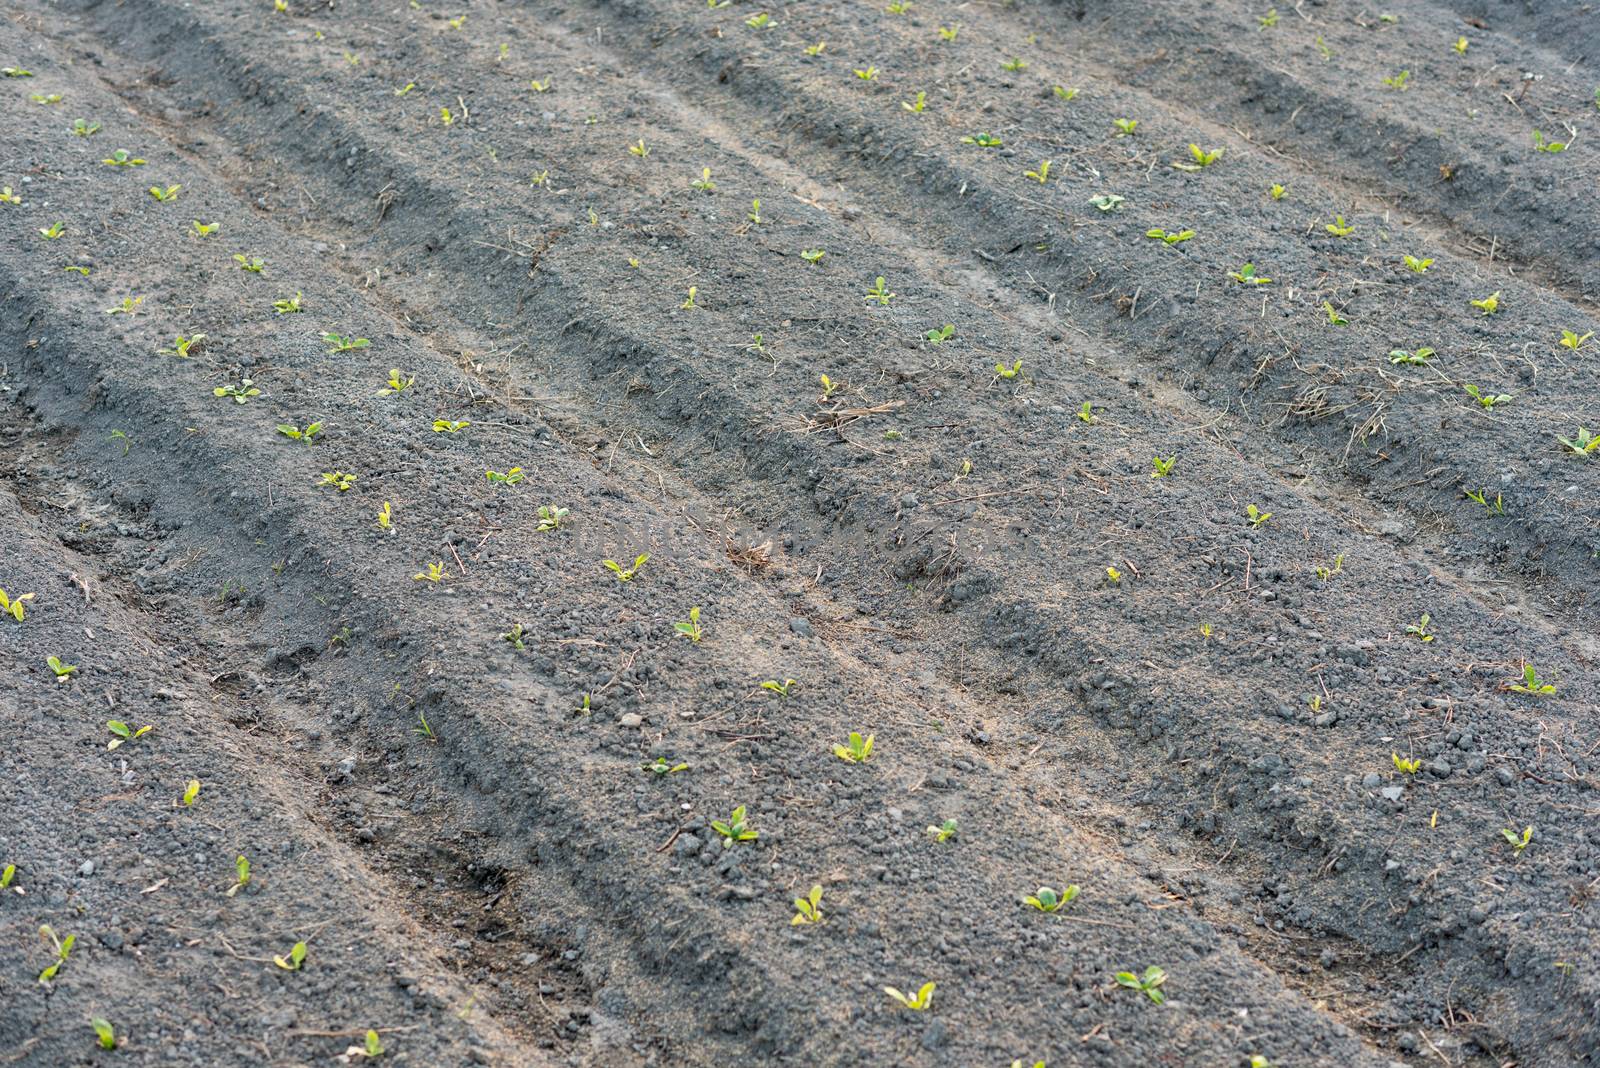 Rows of newly planted plants in a field of dirt.